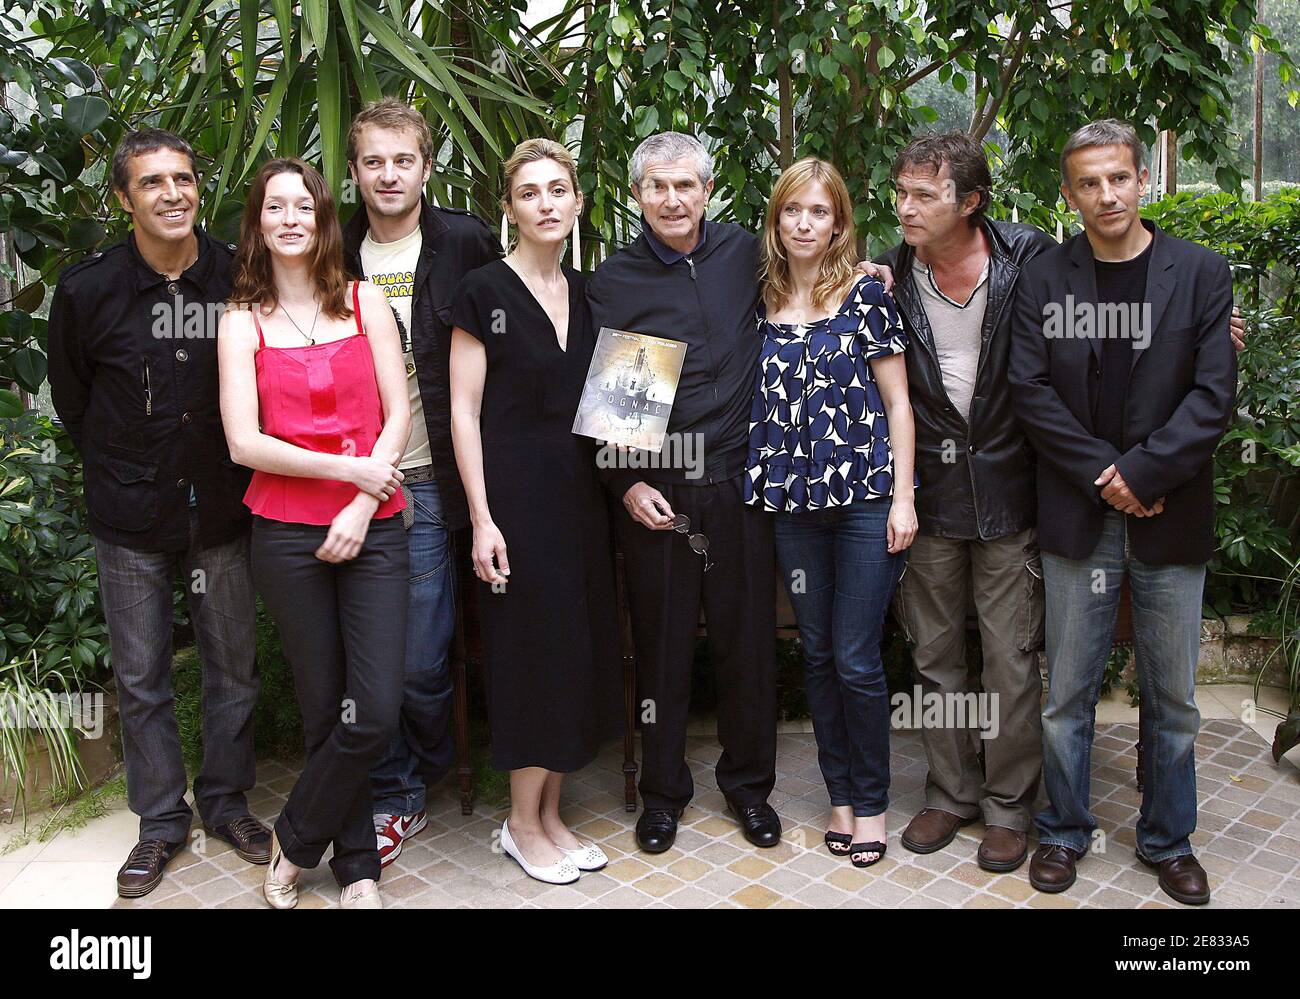 Jury of the festival's members (L-R) Julien Clerc, Audrey Marnay, Jocelyn Quivrin, Julie Gayet, Claude Lelouch, Lea Drucker, Bruno Wolkowitch, Jean-Pierre Lorit pose during the 3rd day of the '25th Festival du Film Policier' (Mystery Film) held in Cognac, South-West of France on June 23, 2007. Photo by Patrick Bernard/ABACAPRESS.COM Stock Photo